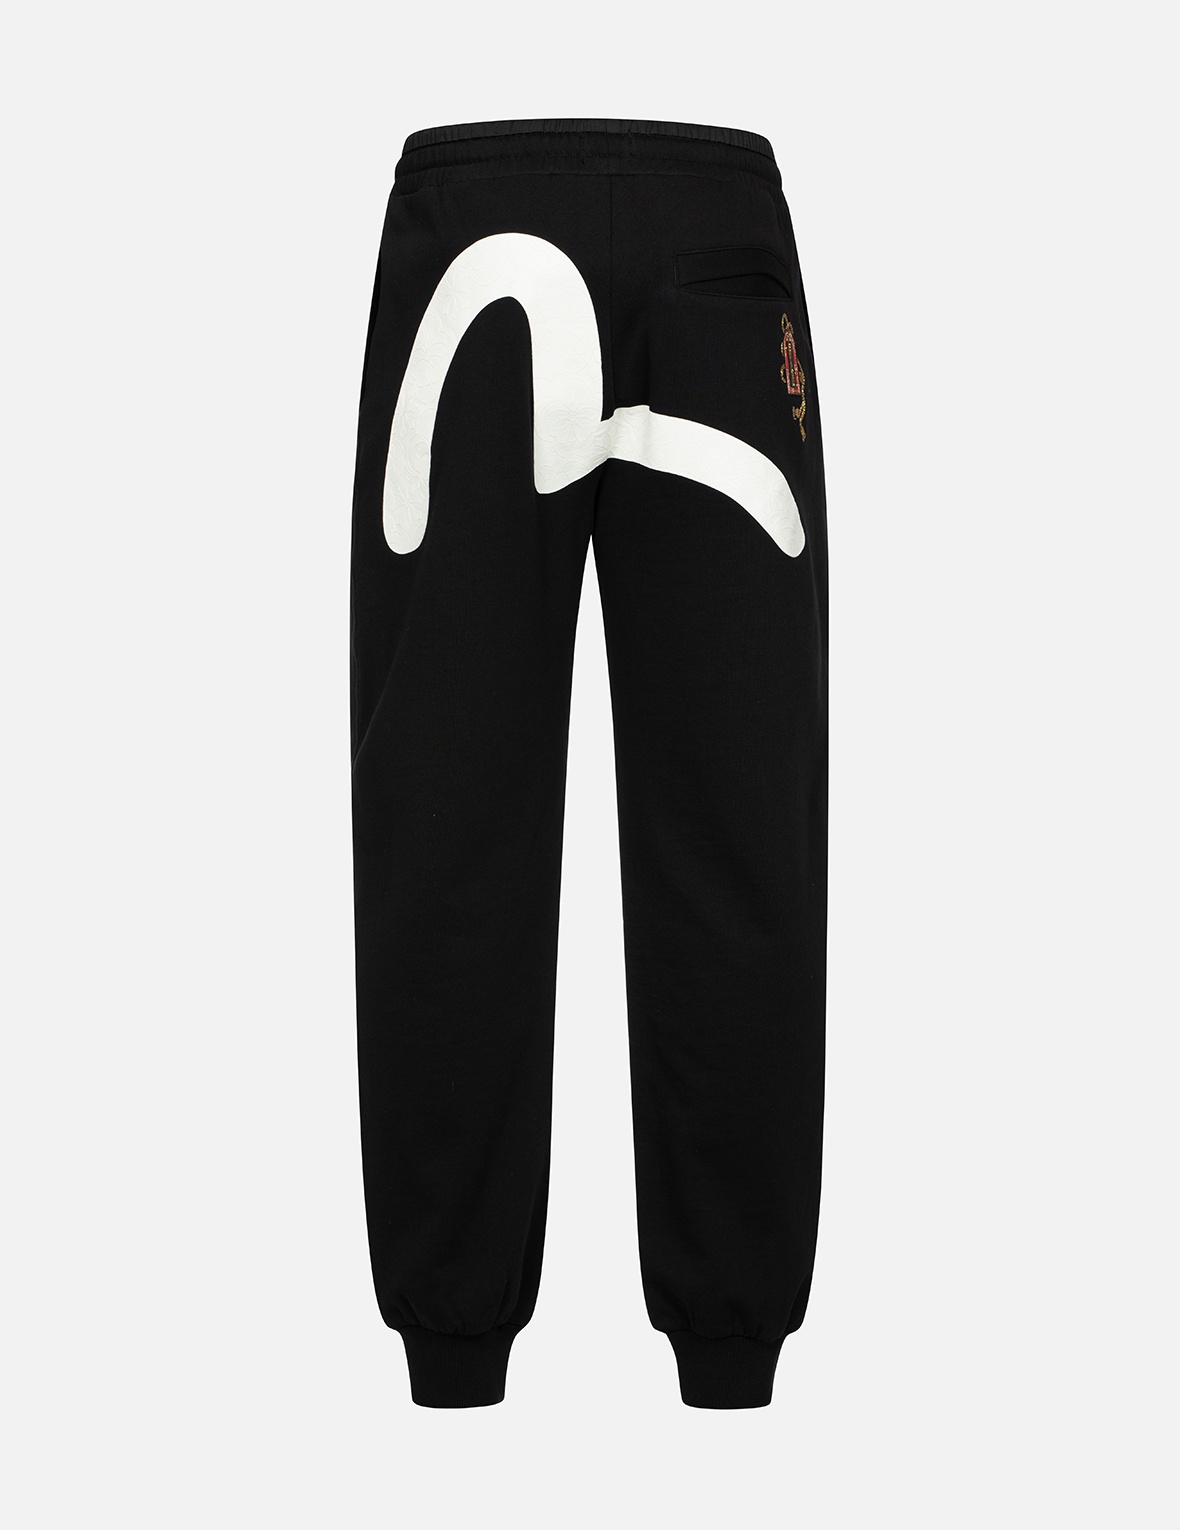 SEAGULL PRINT AND LUCKY CHARM APPLIQUÉ STRAIGHT FIT SWEATPANTS - 2